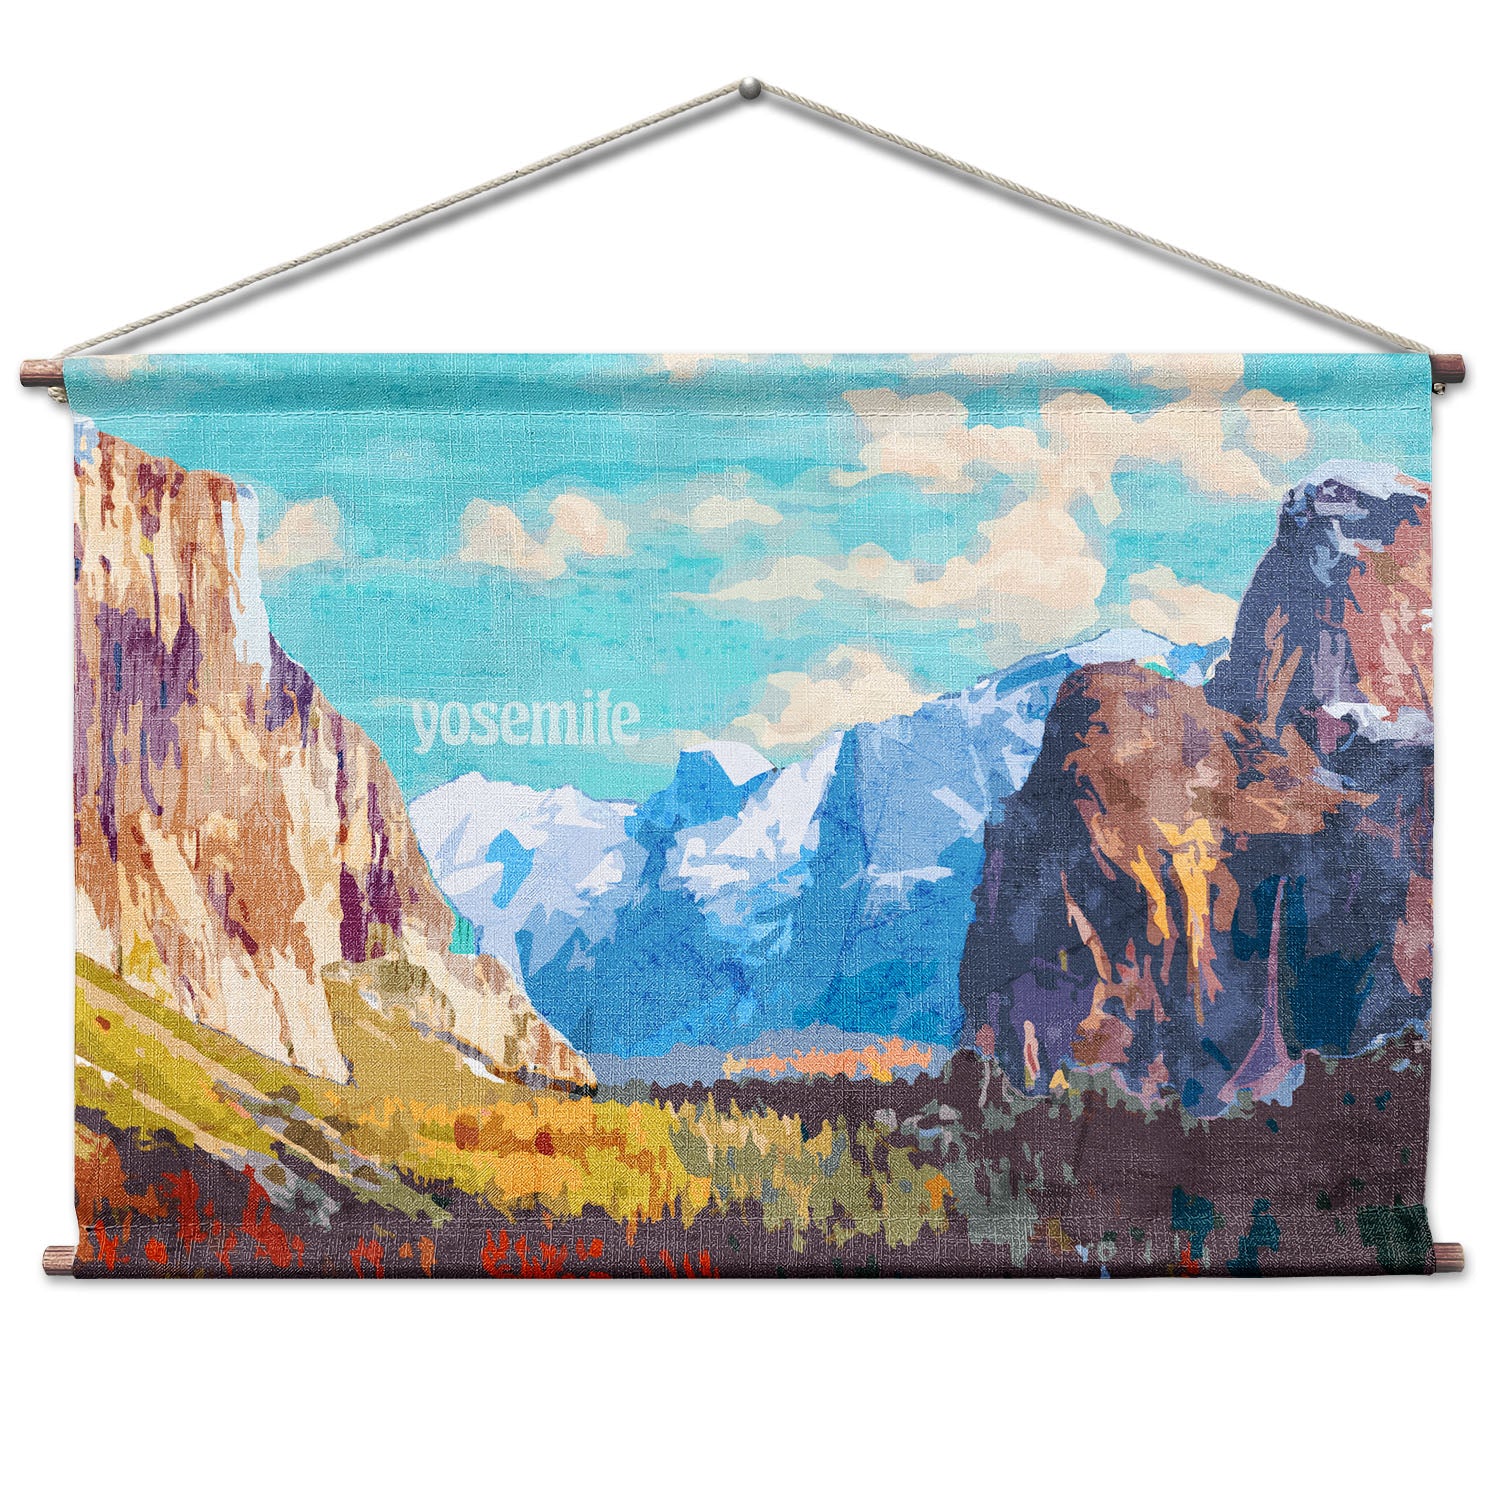 Yosemite National Park Abstract Landscape Wall Hanging - Walnut -  - Knotty Tie Co.